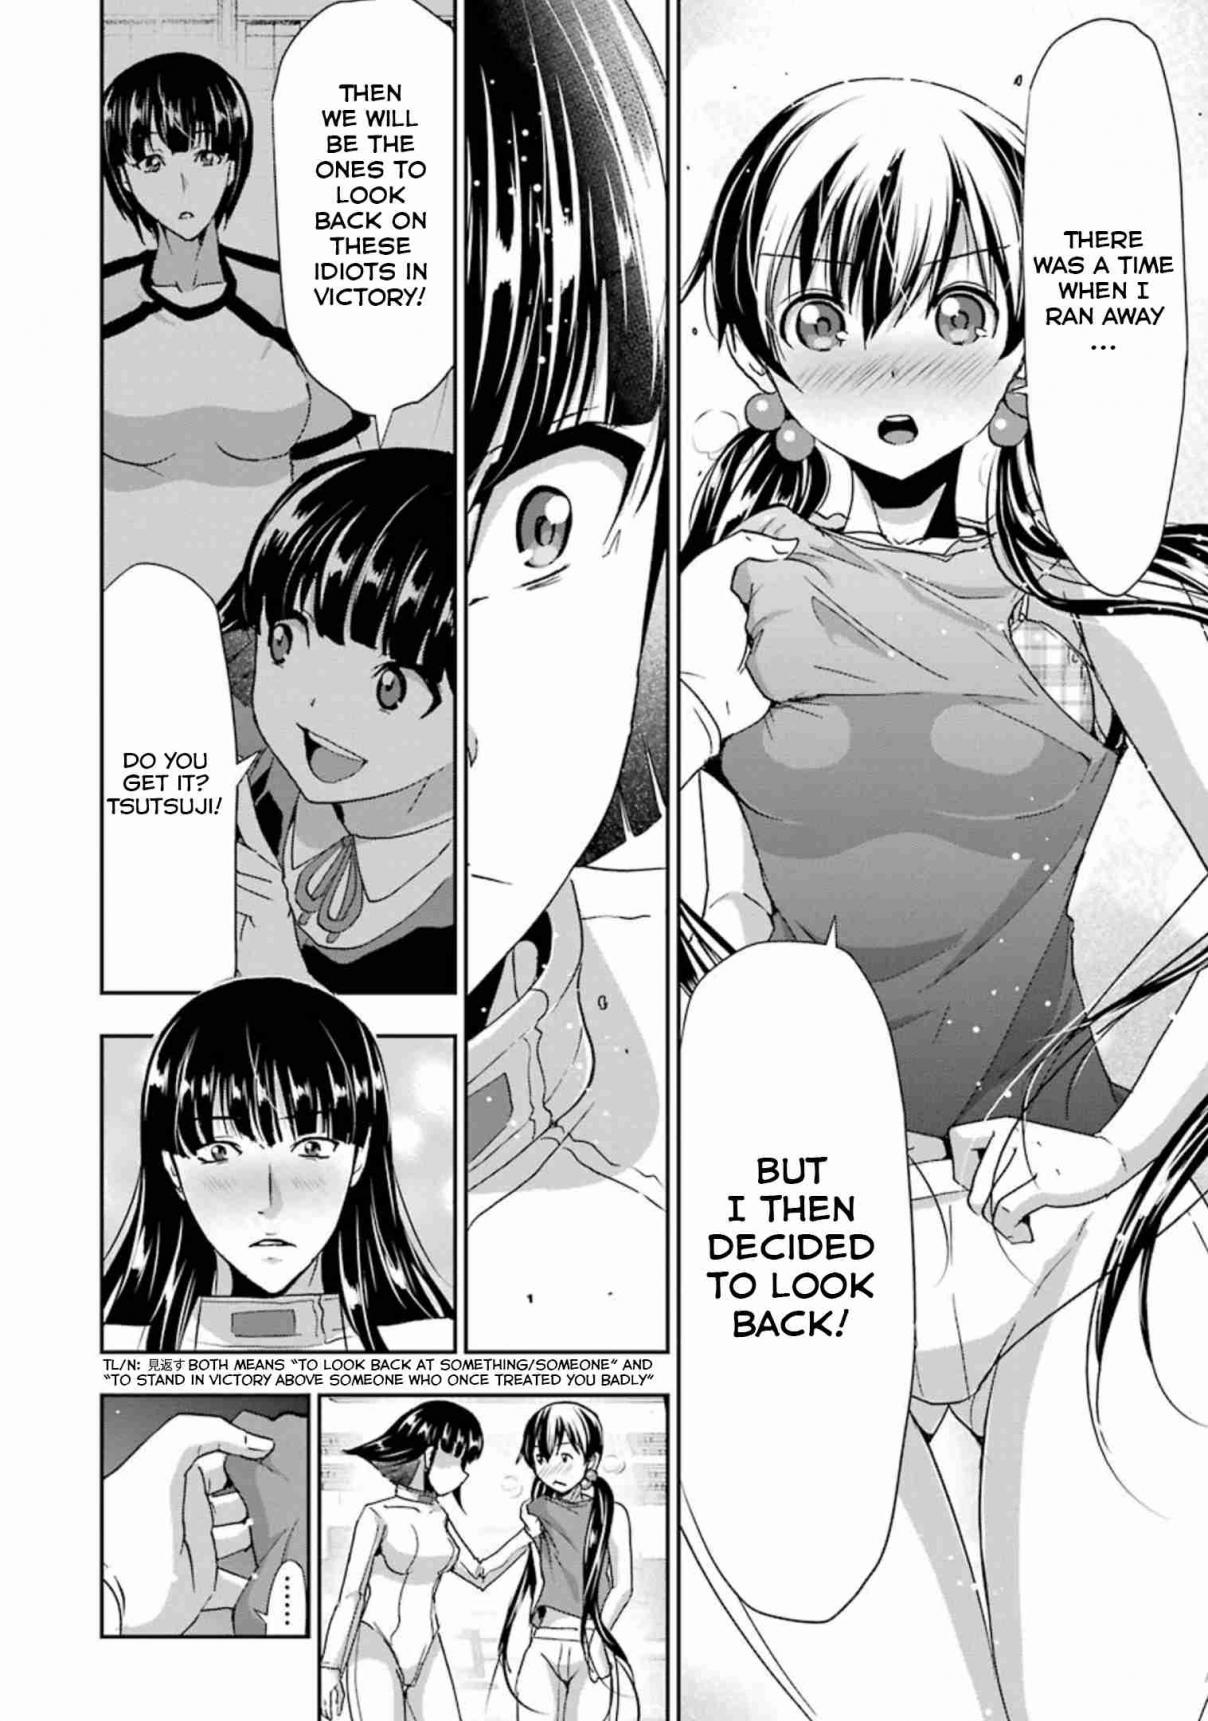 Duel! Vol. 4 Ch. 34 I will look back!